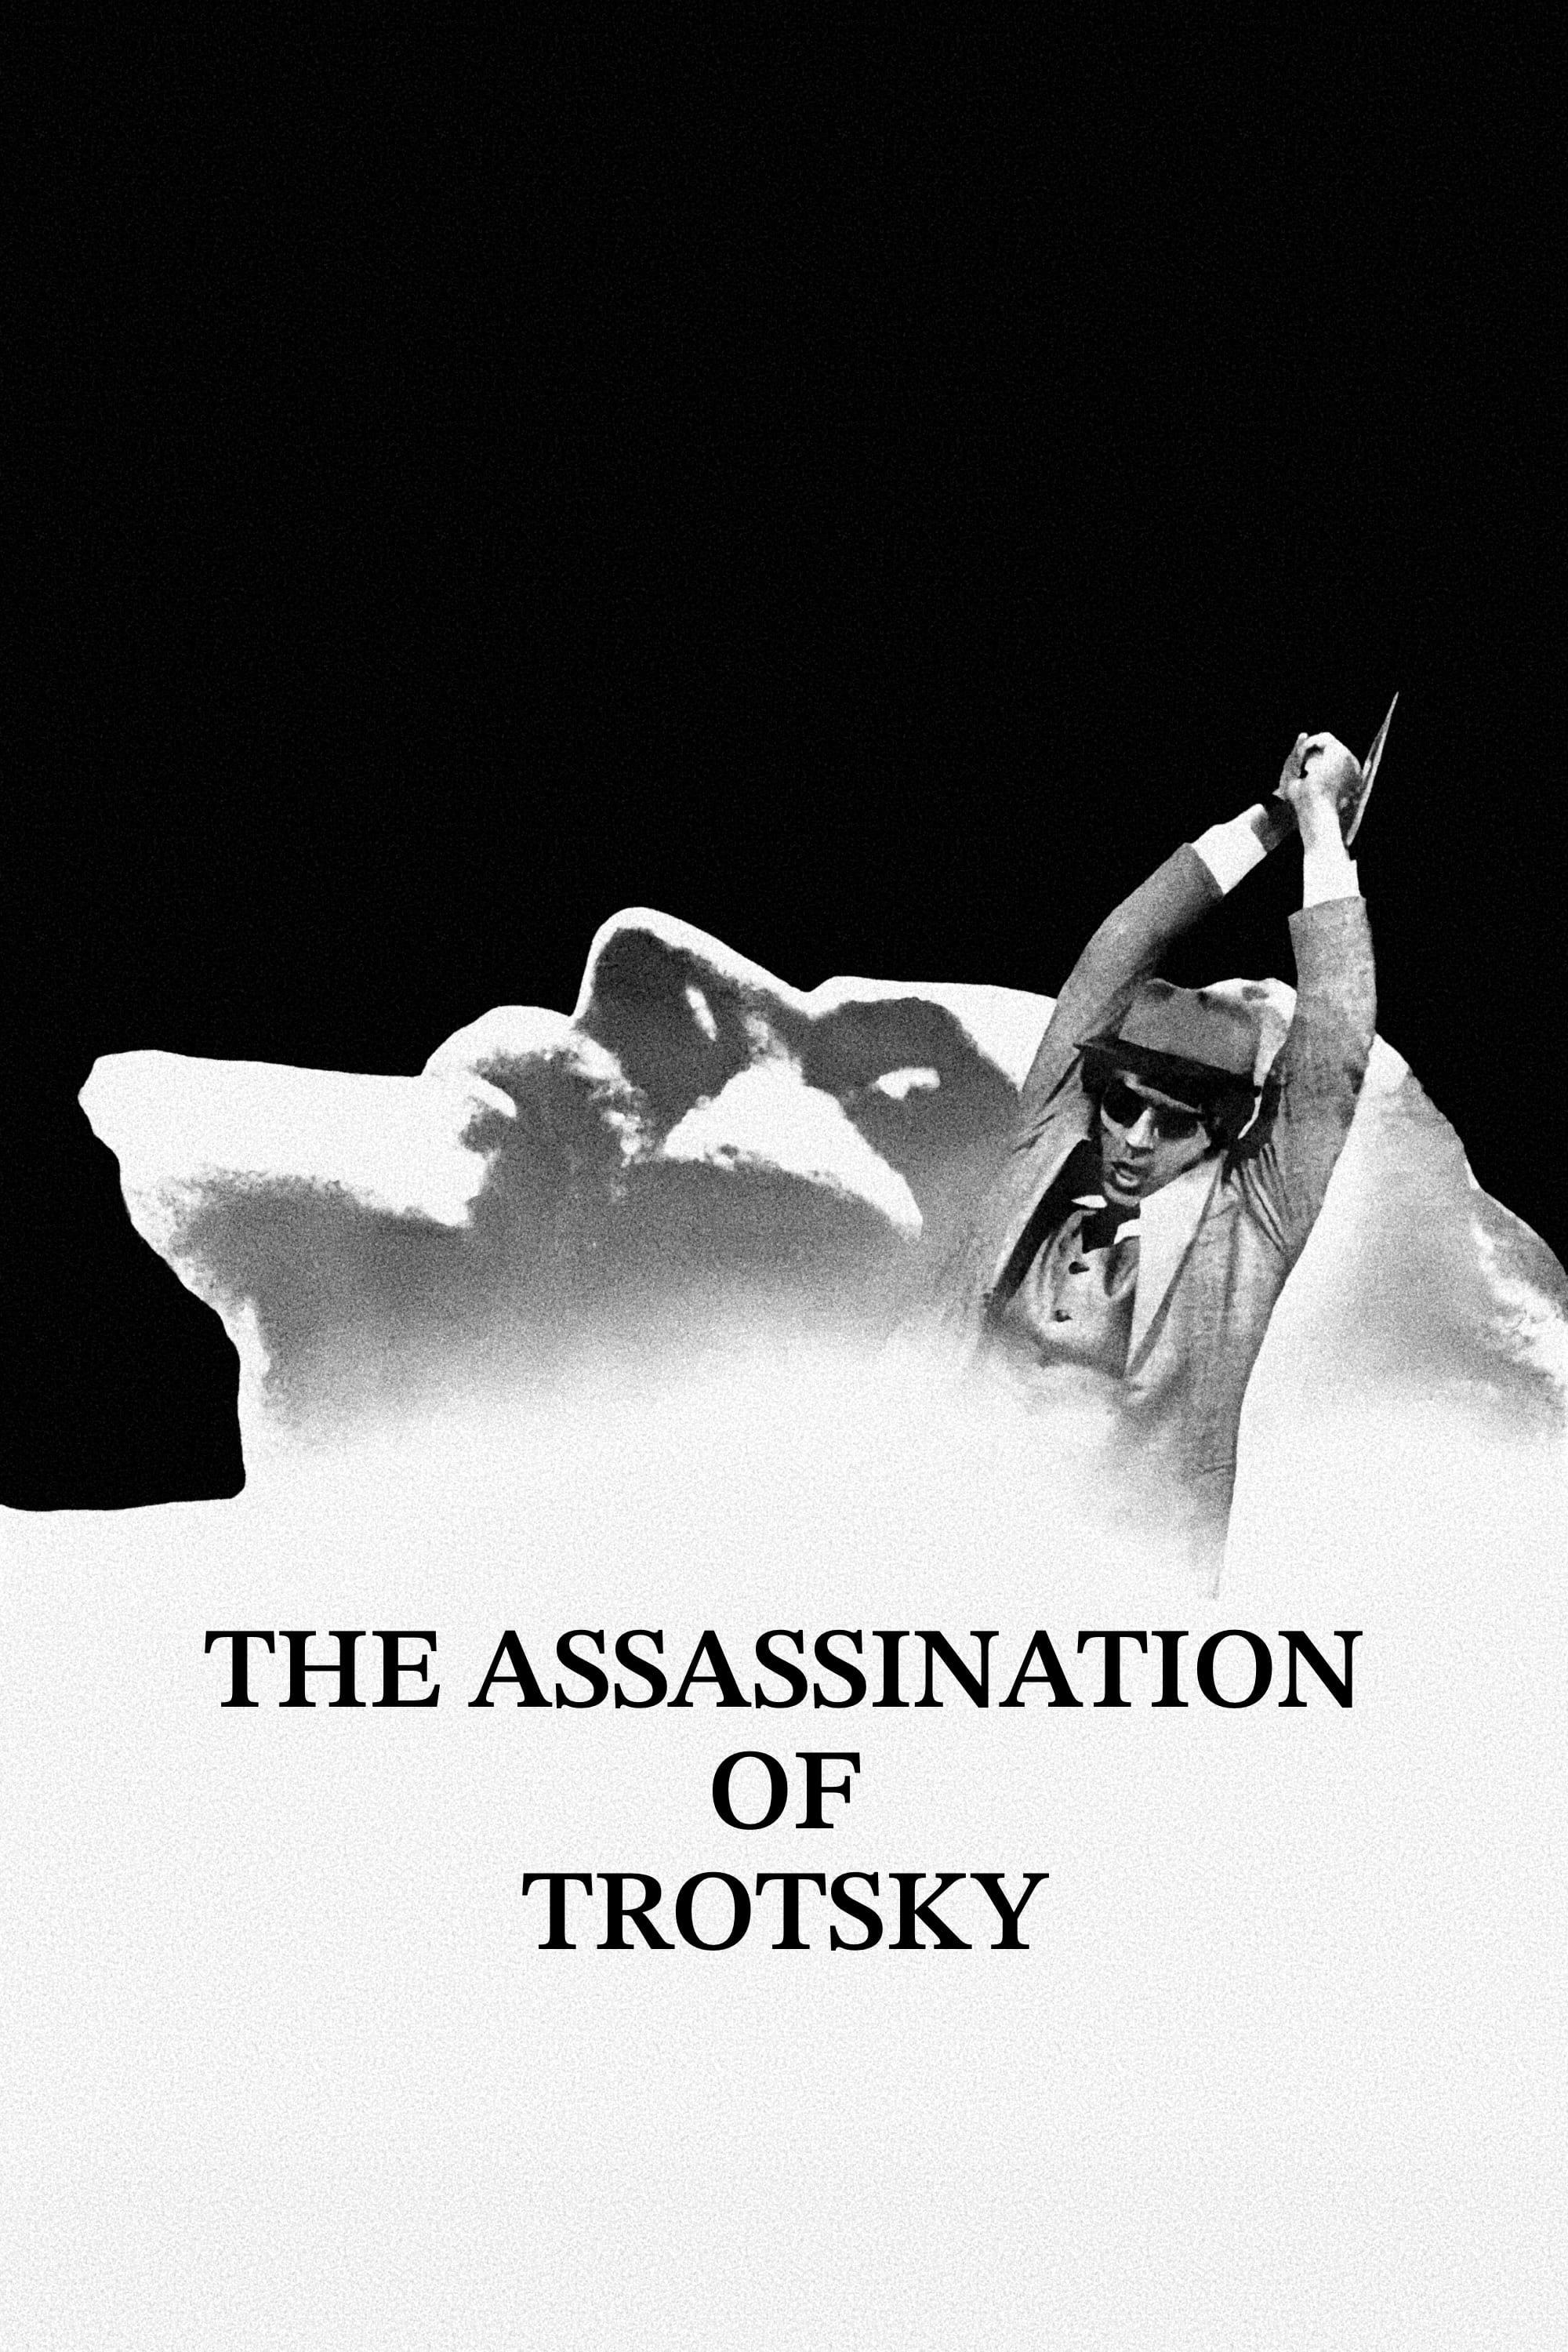 The Assassination of Trotsky poster